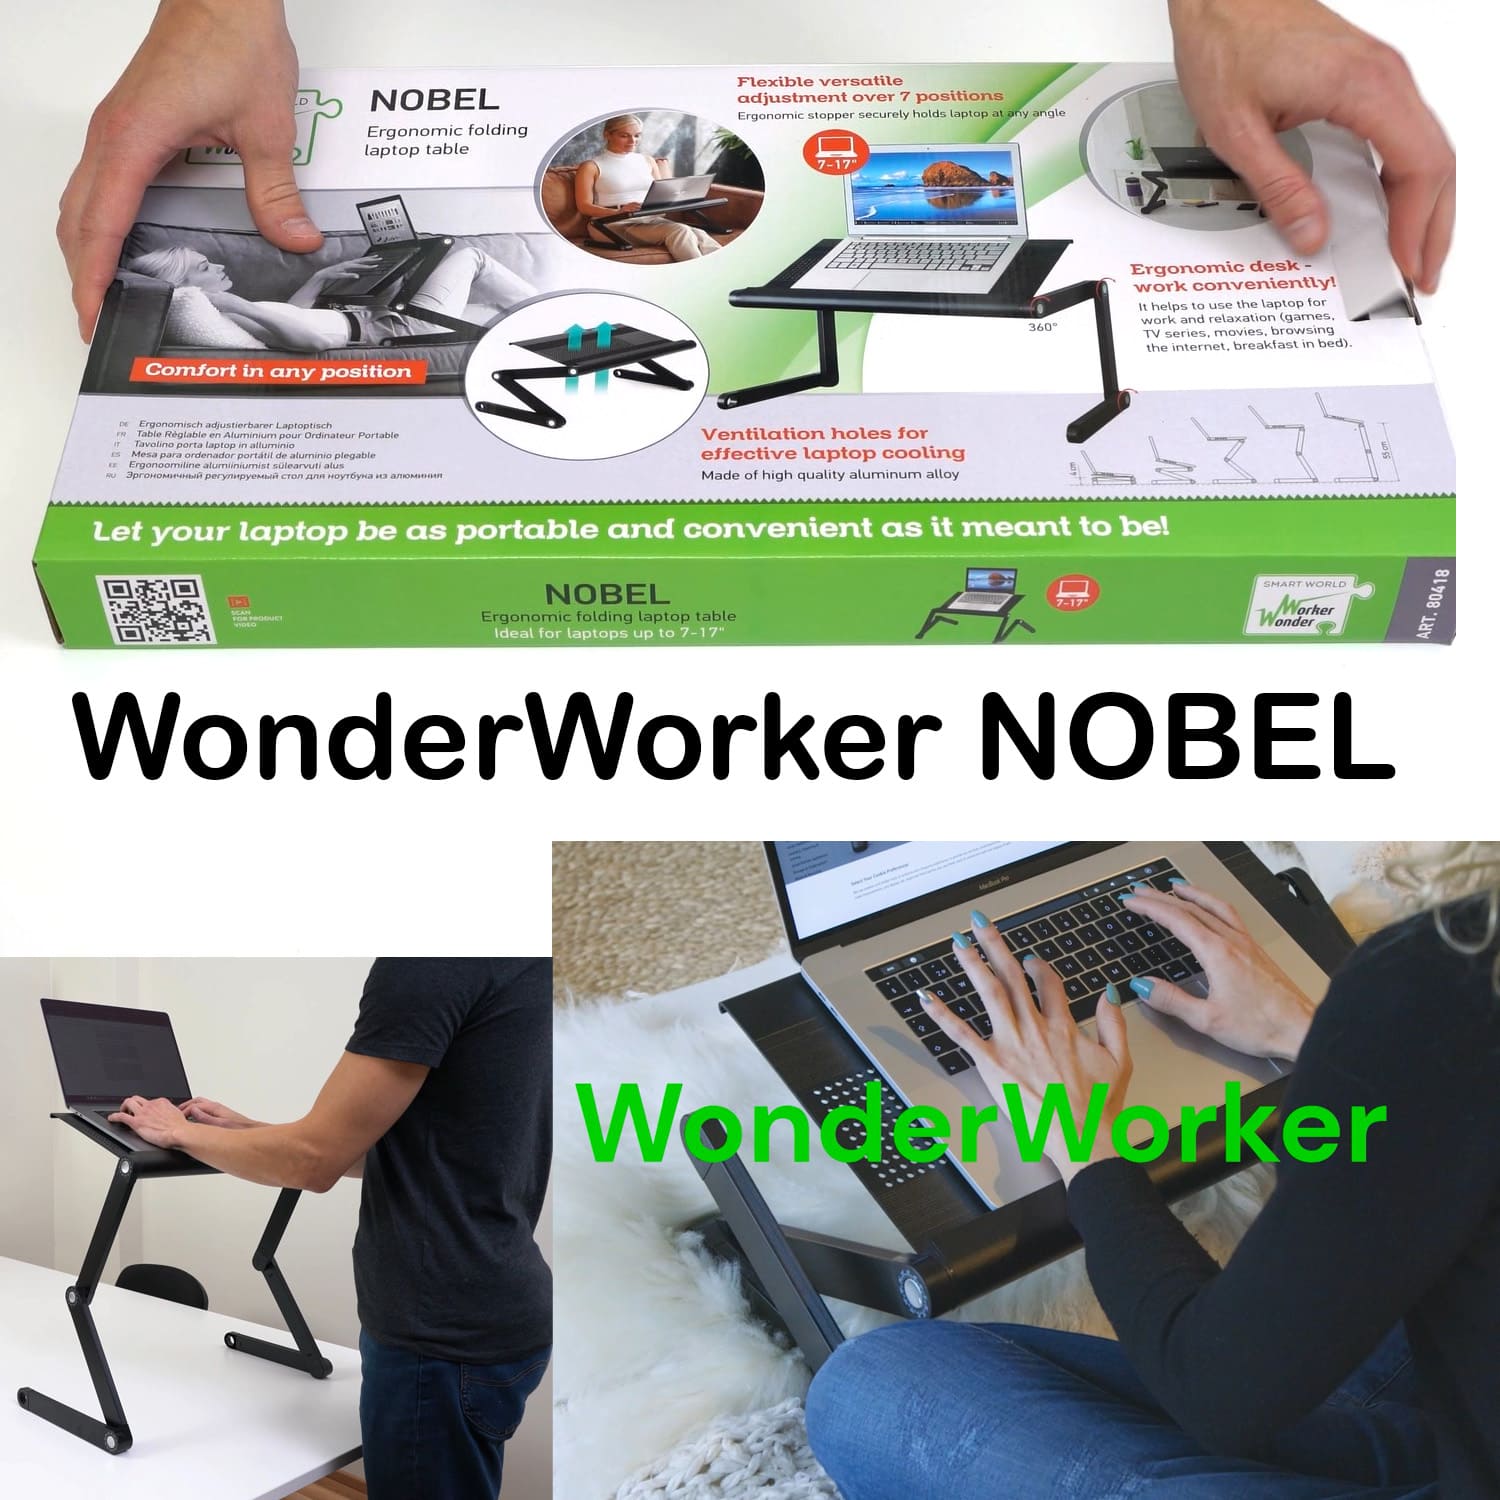 Laptop Stand, Laptop Stand for Bed, Adjustable Laptop Stand, Folding Laptop Stand, Cooling Tray, WonderWorker Nobel, 16